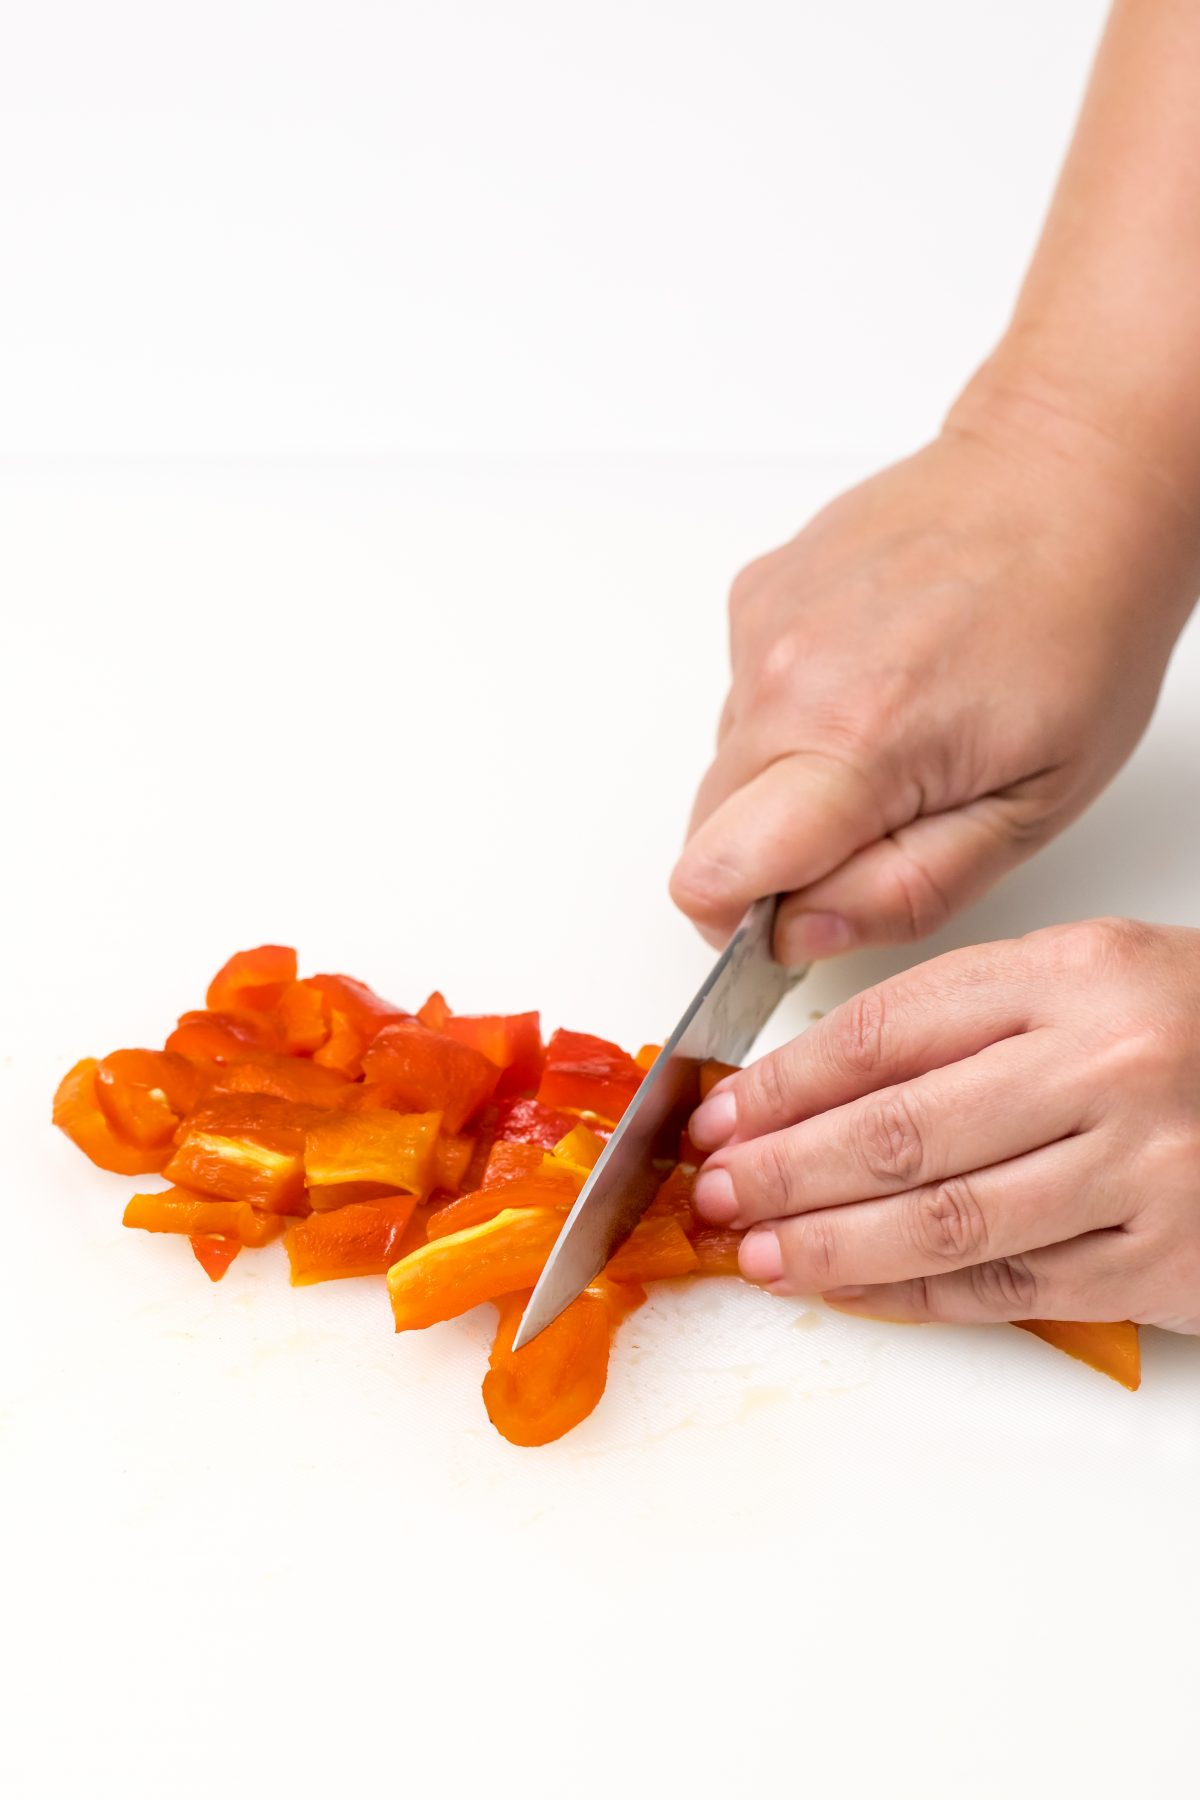 Clean and chop red peppers